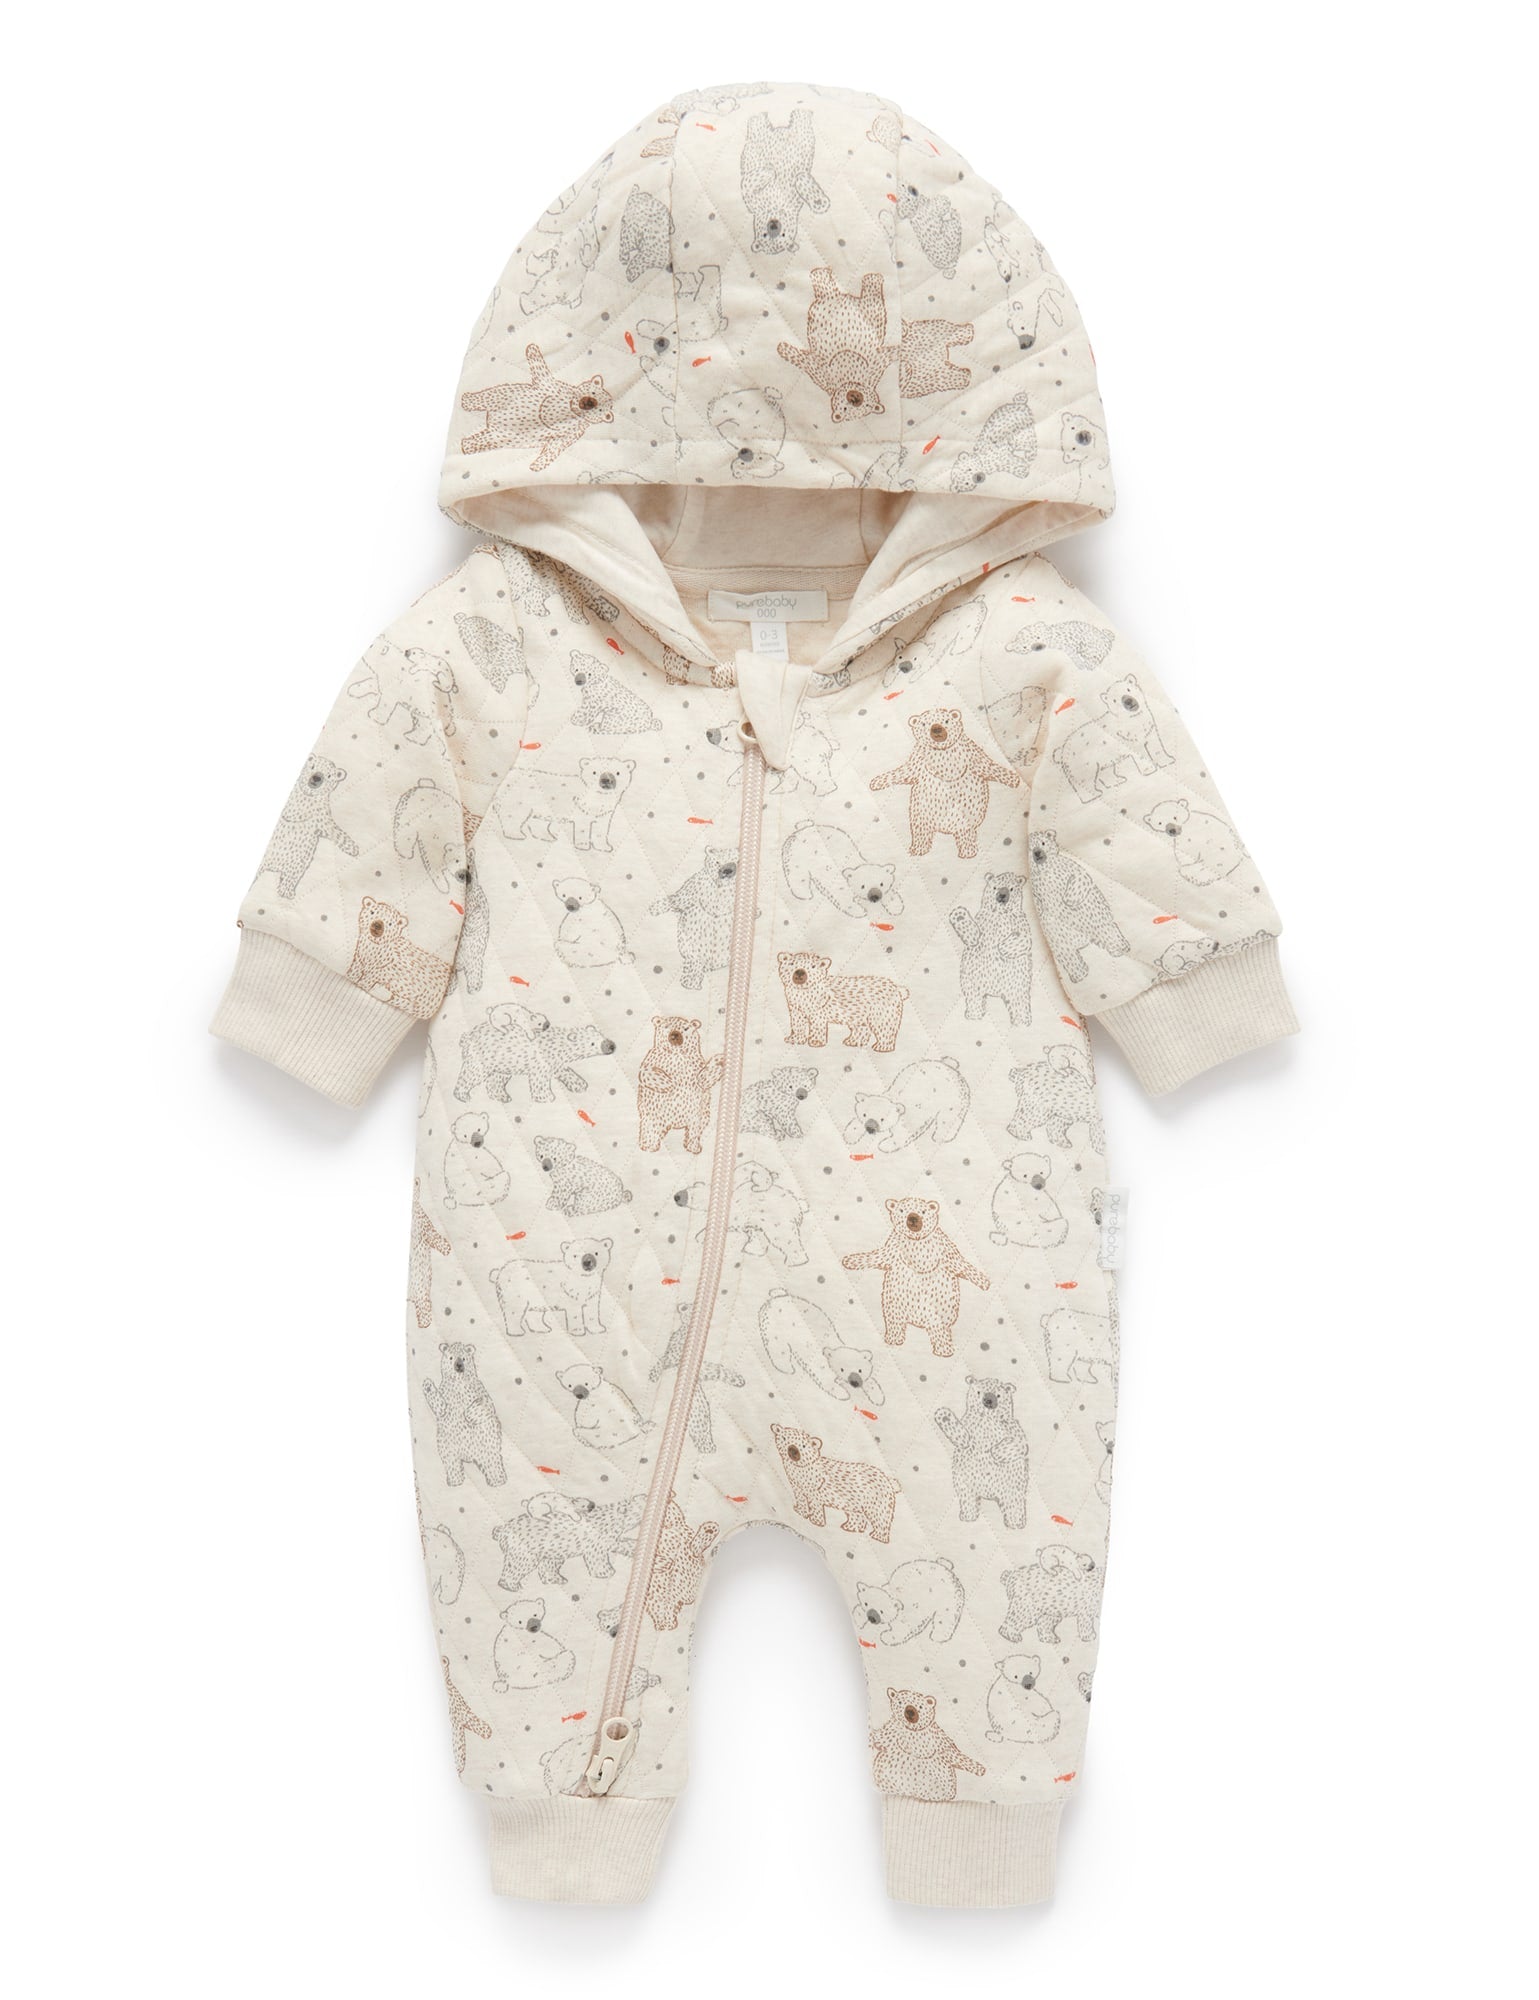 Quilted Overall Set - Grey Melange - Purebaby